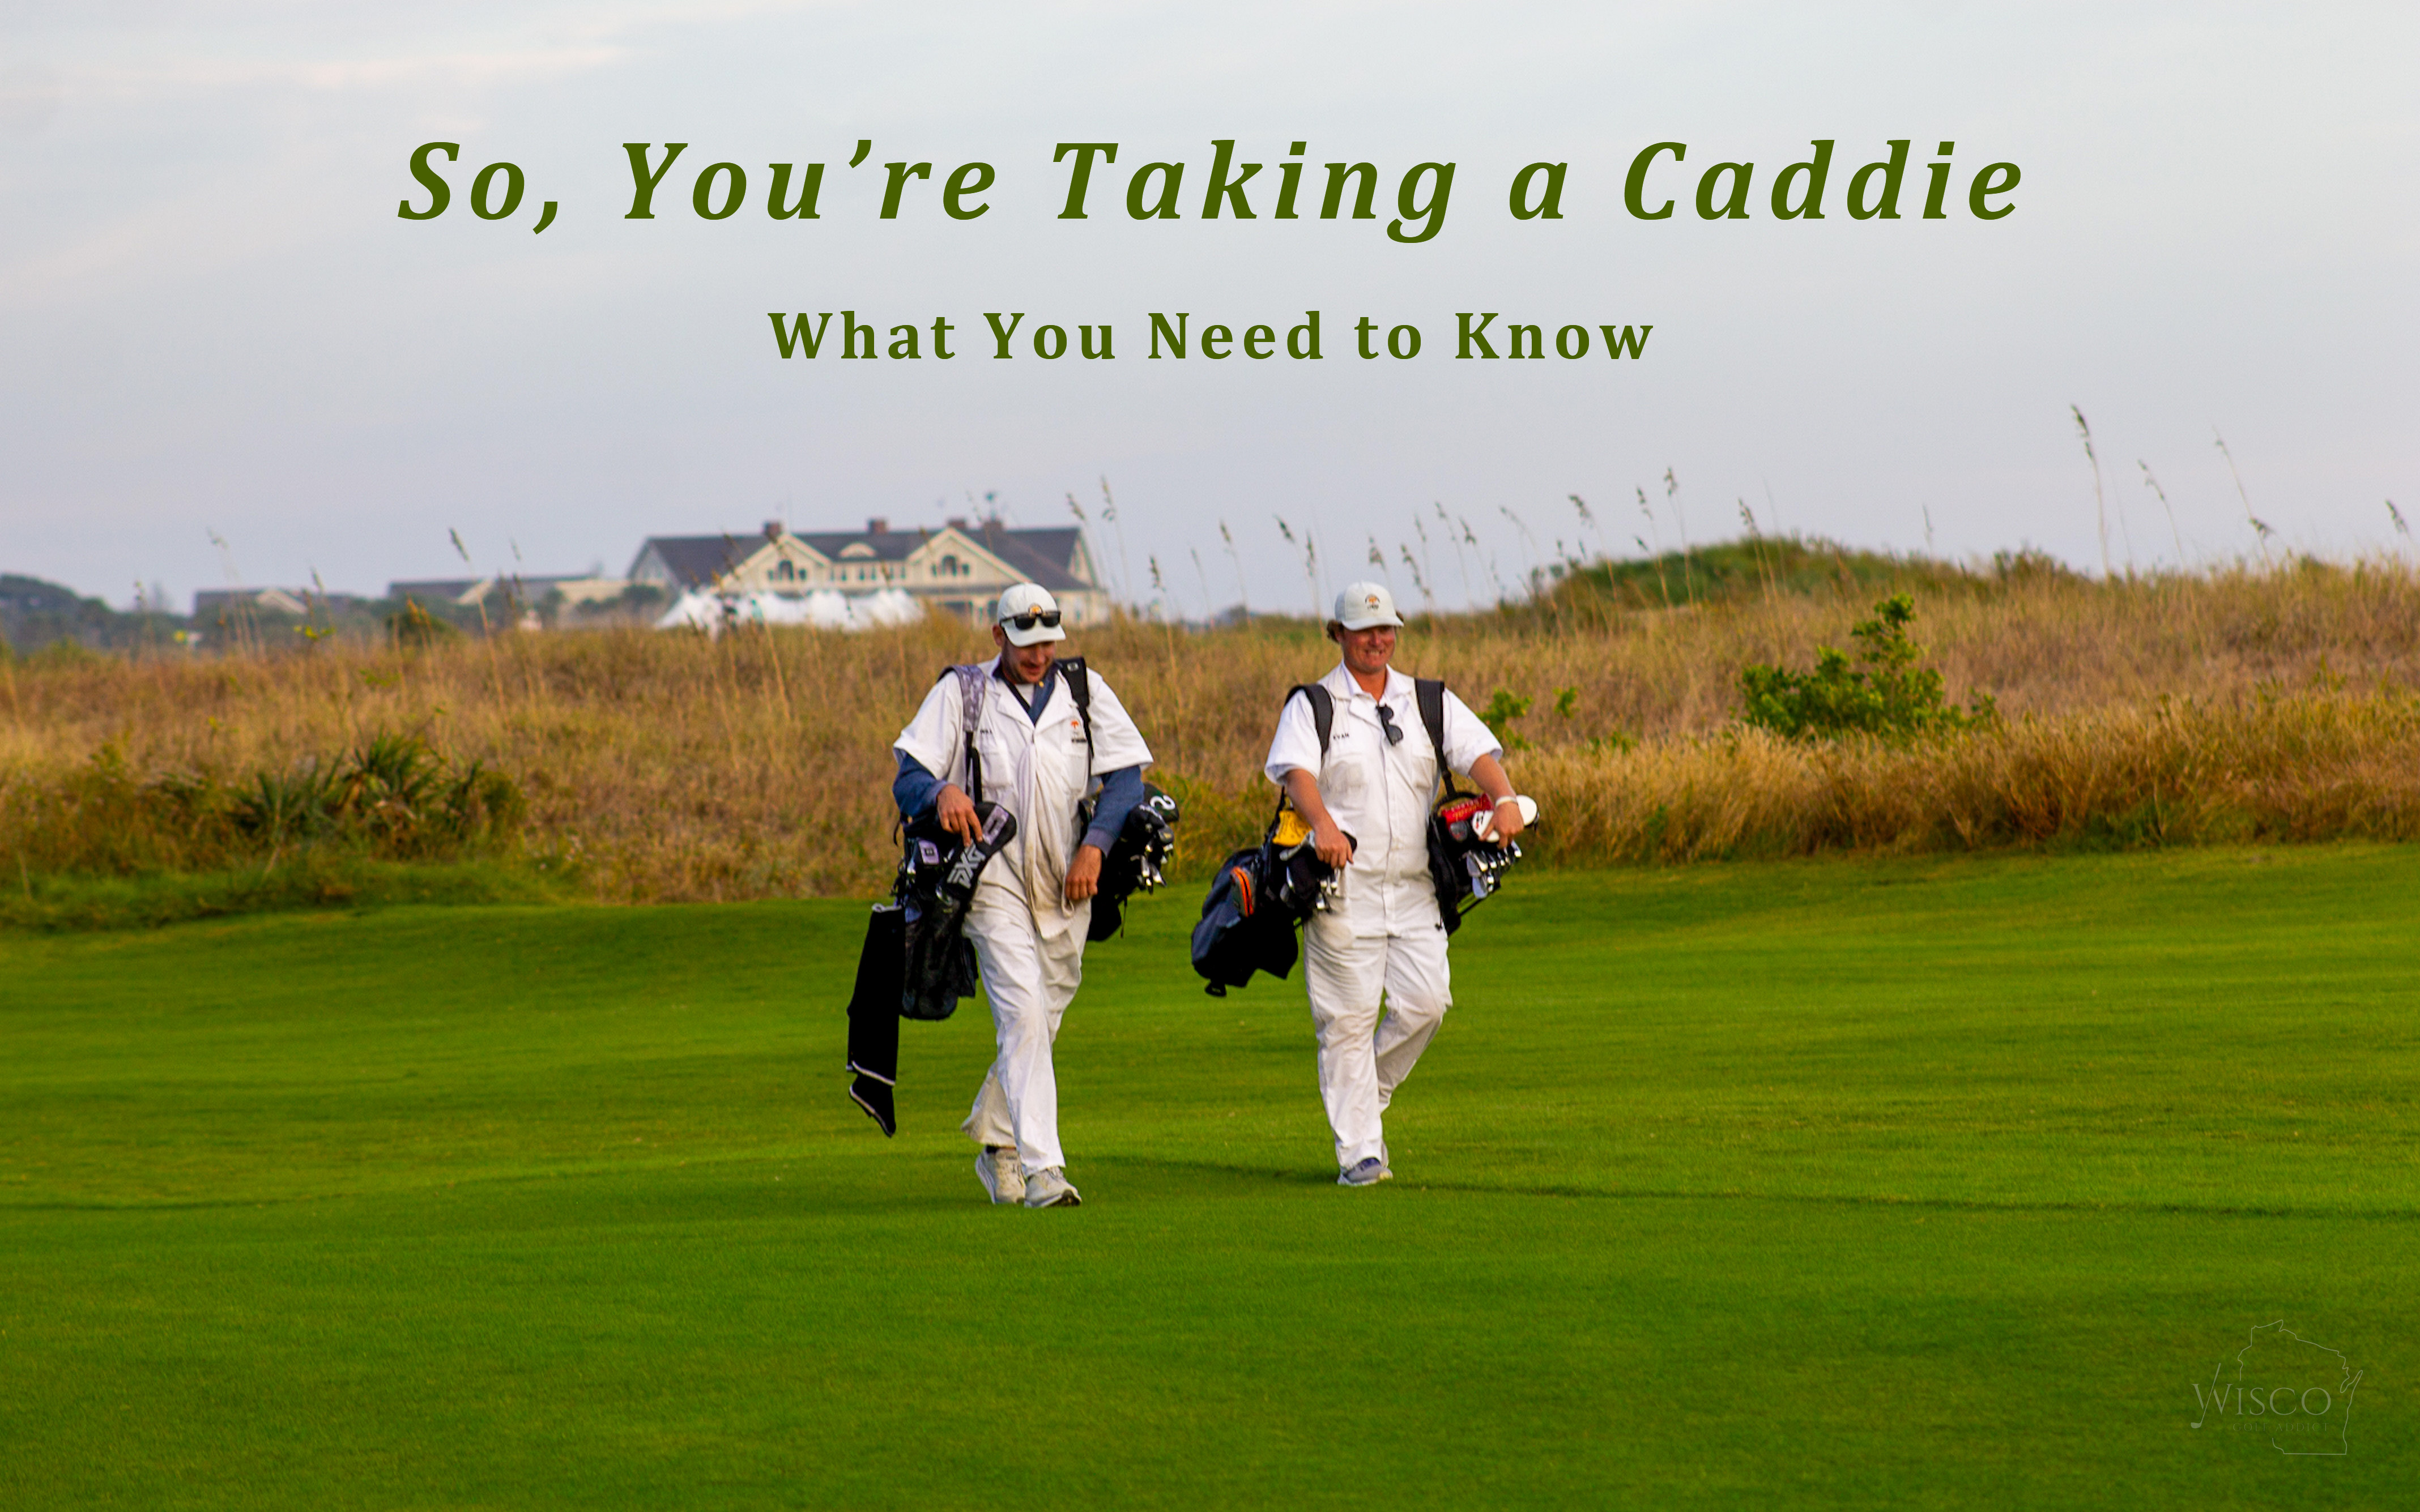 So, You’re Taking a Caddie: What You Need to Know